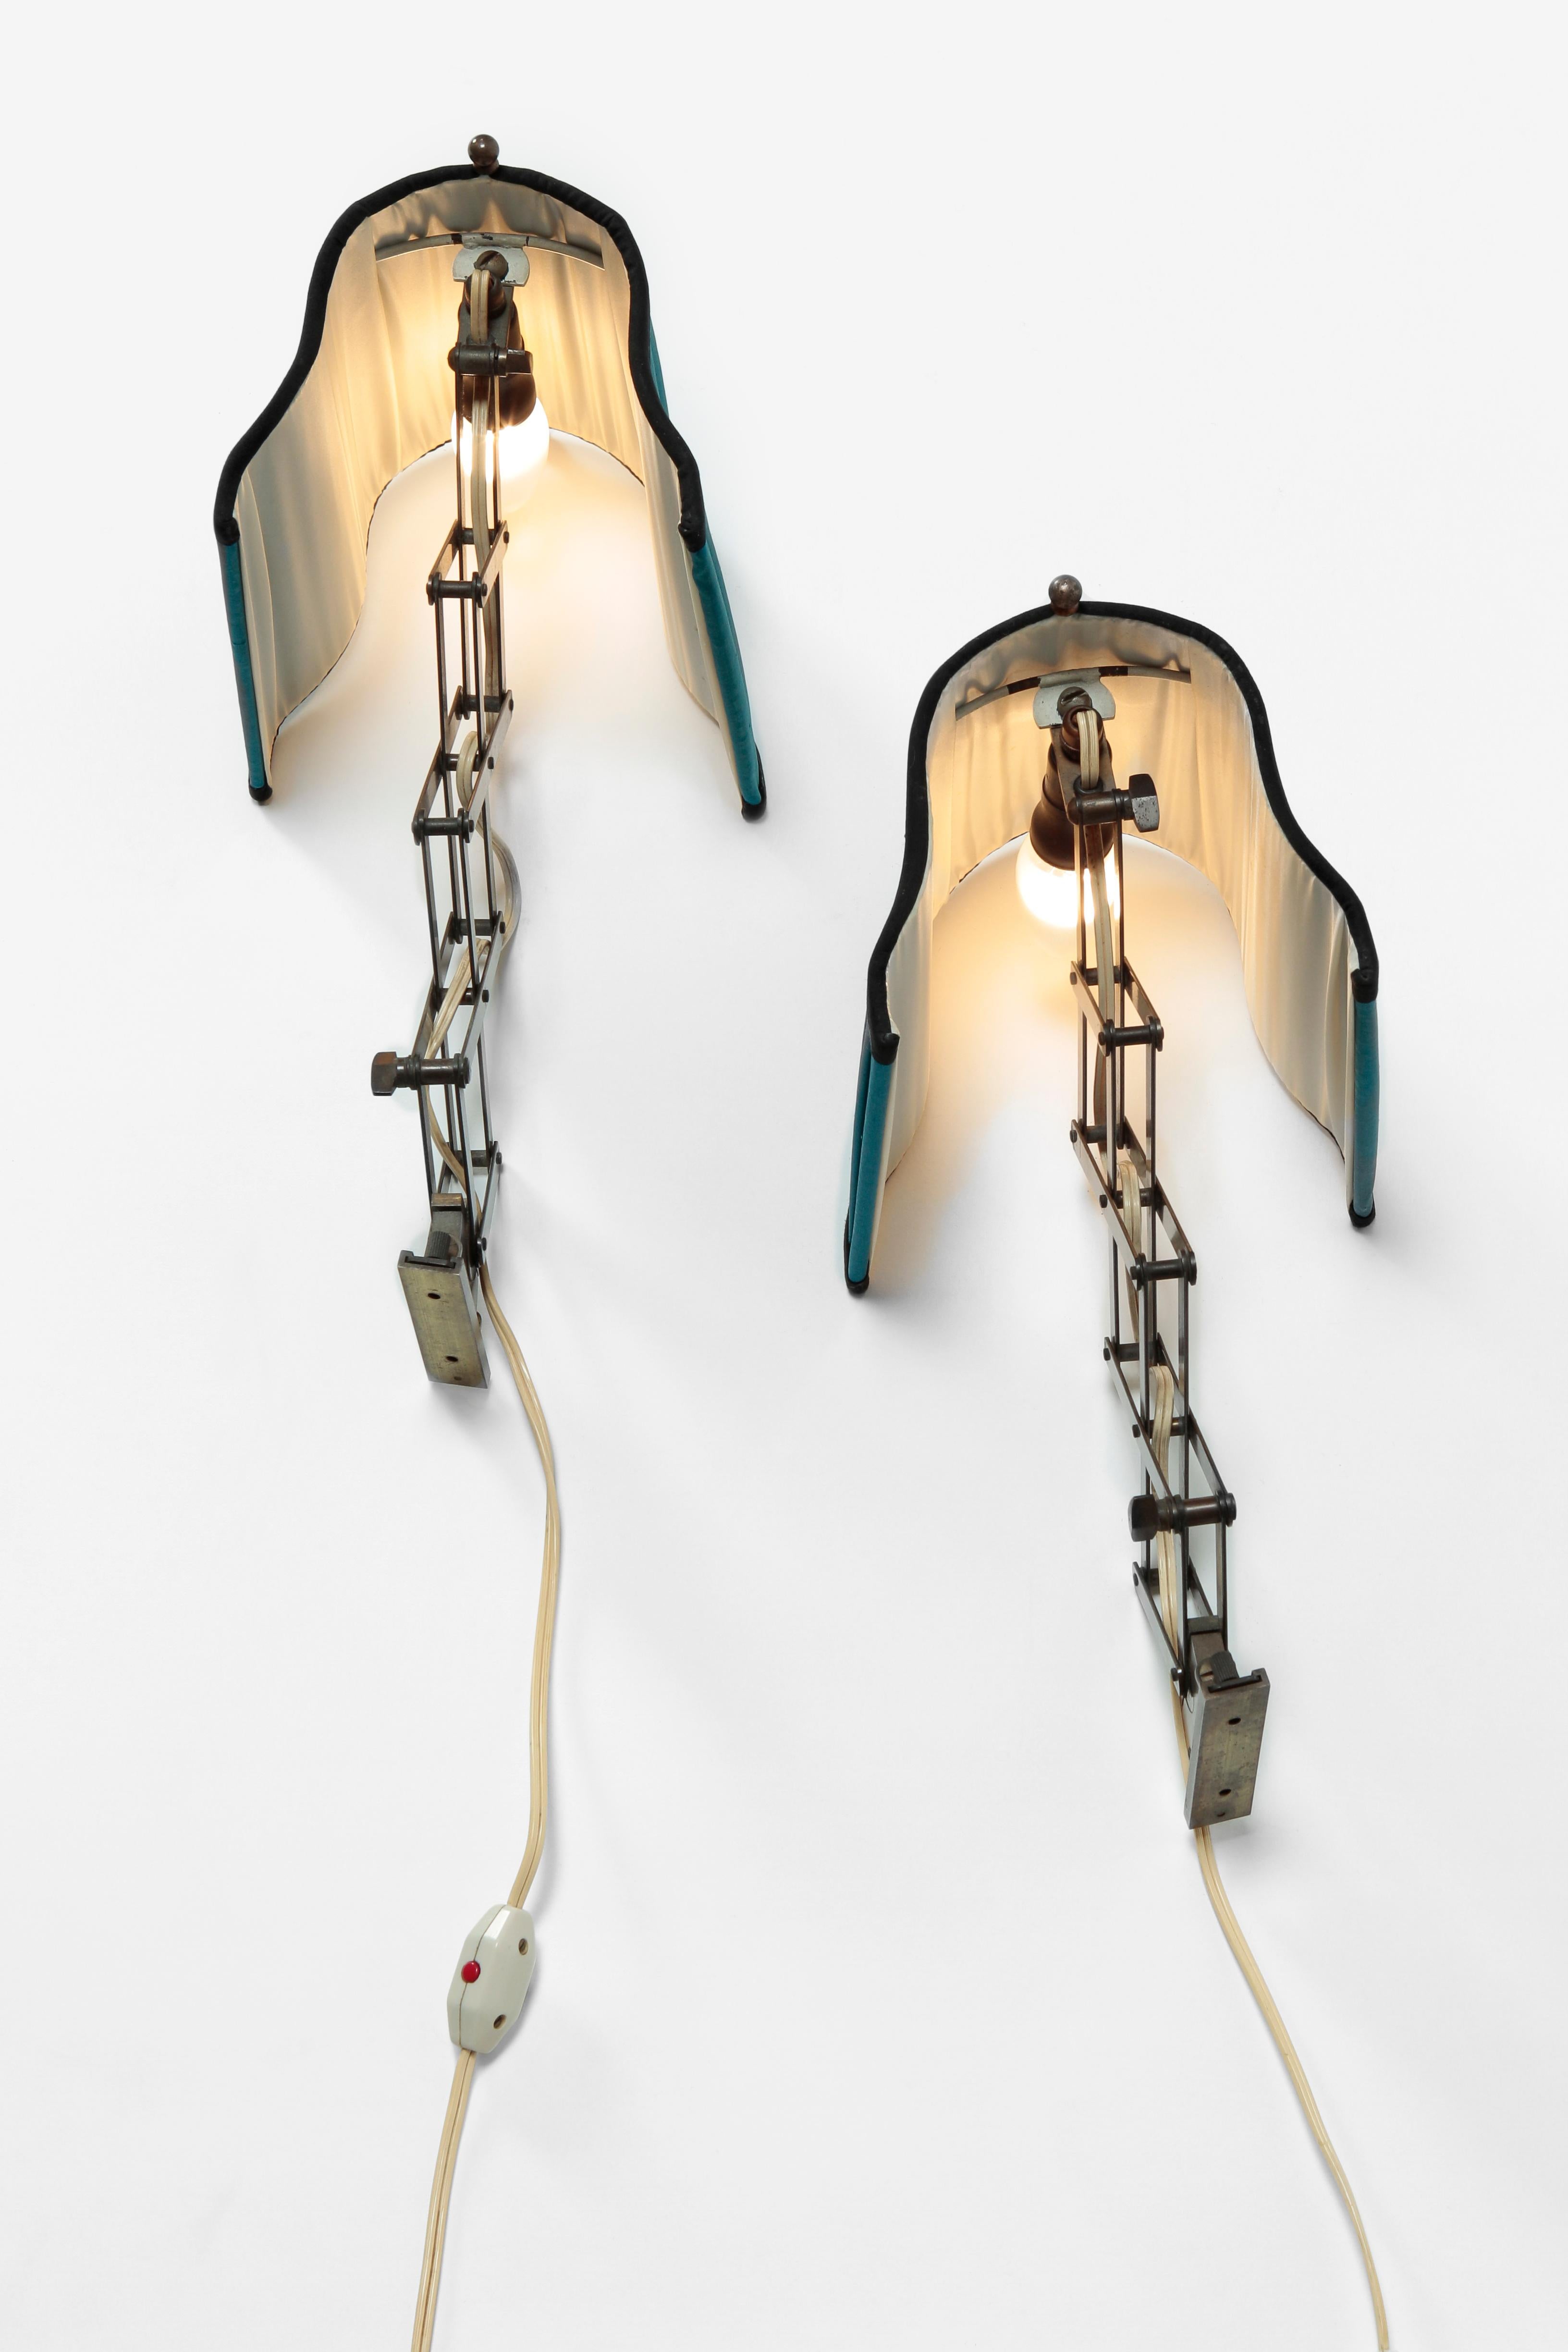 Alfred Müller wall lights manufactured by Amba in the 1940s in Switzerland, Basel. High quality scissor lamps with original cotton lamp shades. The edging on the upper and lower frame was renewed. The length is adjustable from 18 cm to 53 cm.